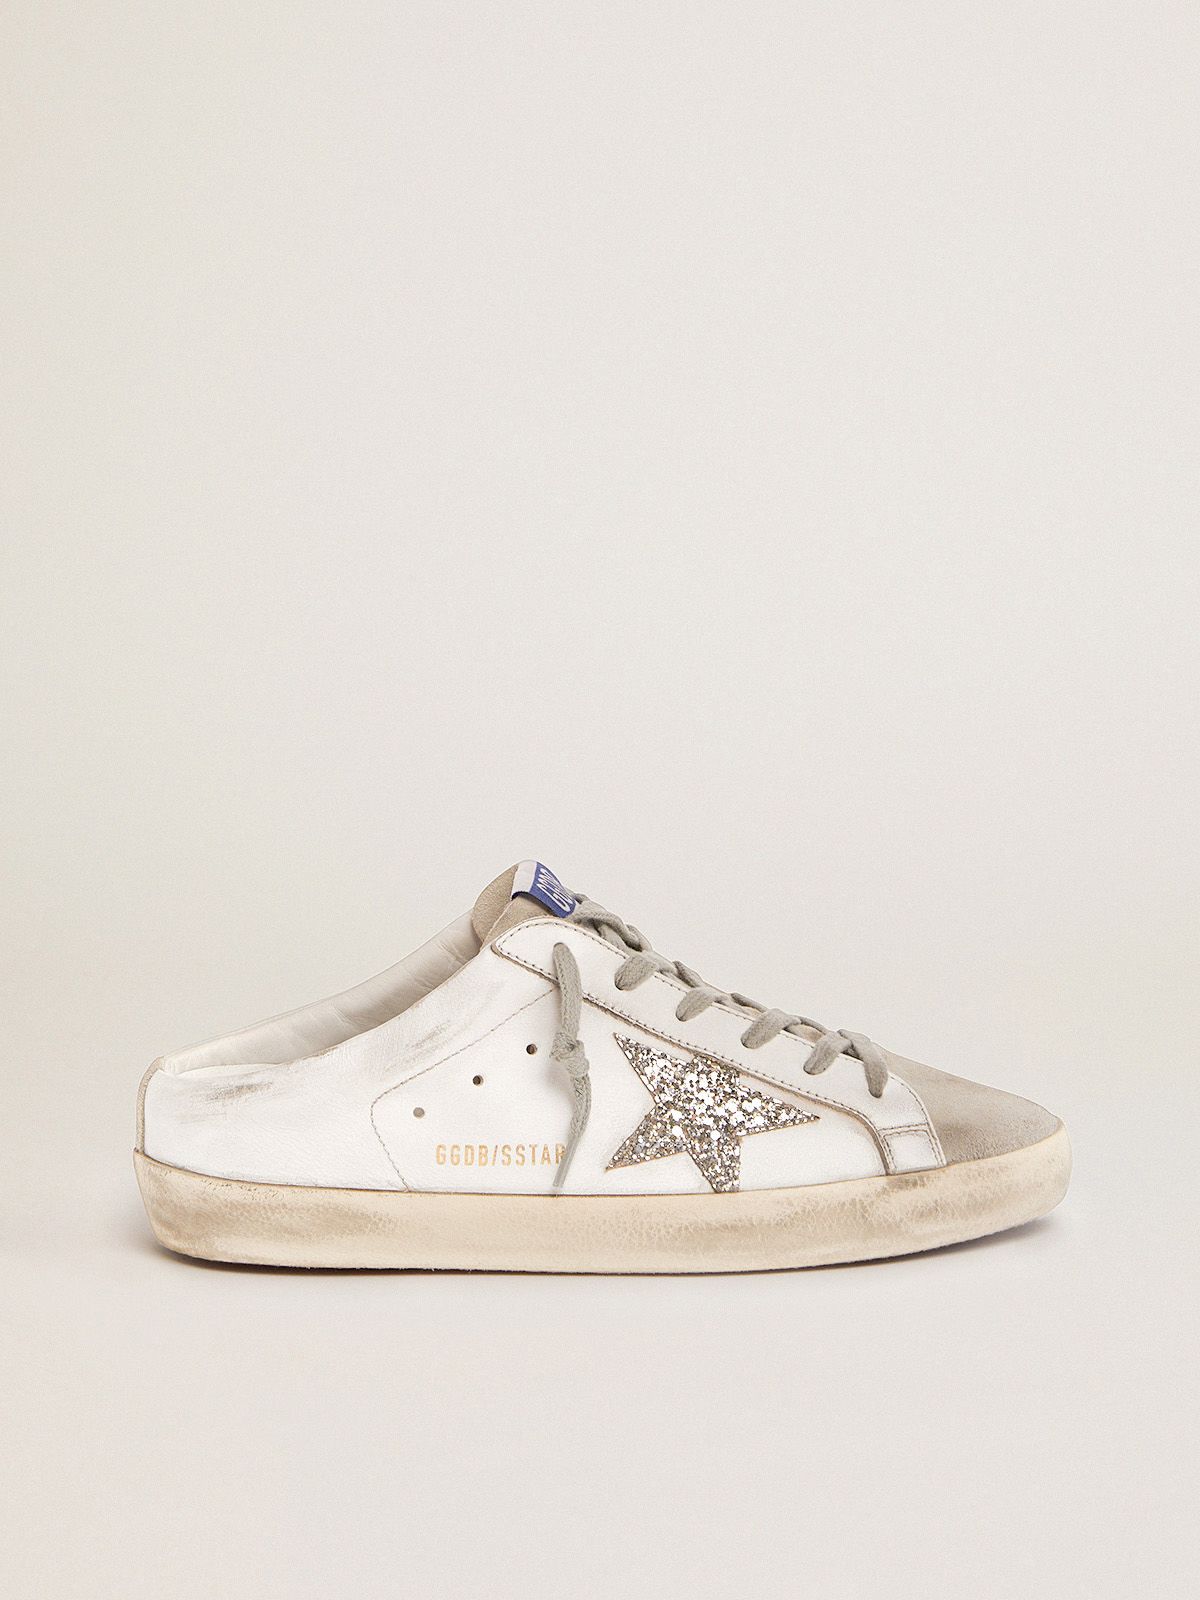 golden goose and leather glitter Sabots silver star gray suede in white Super-Star with